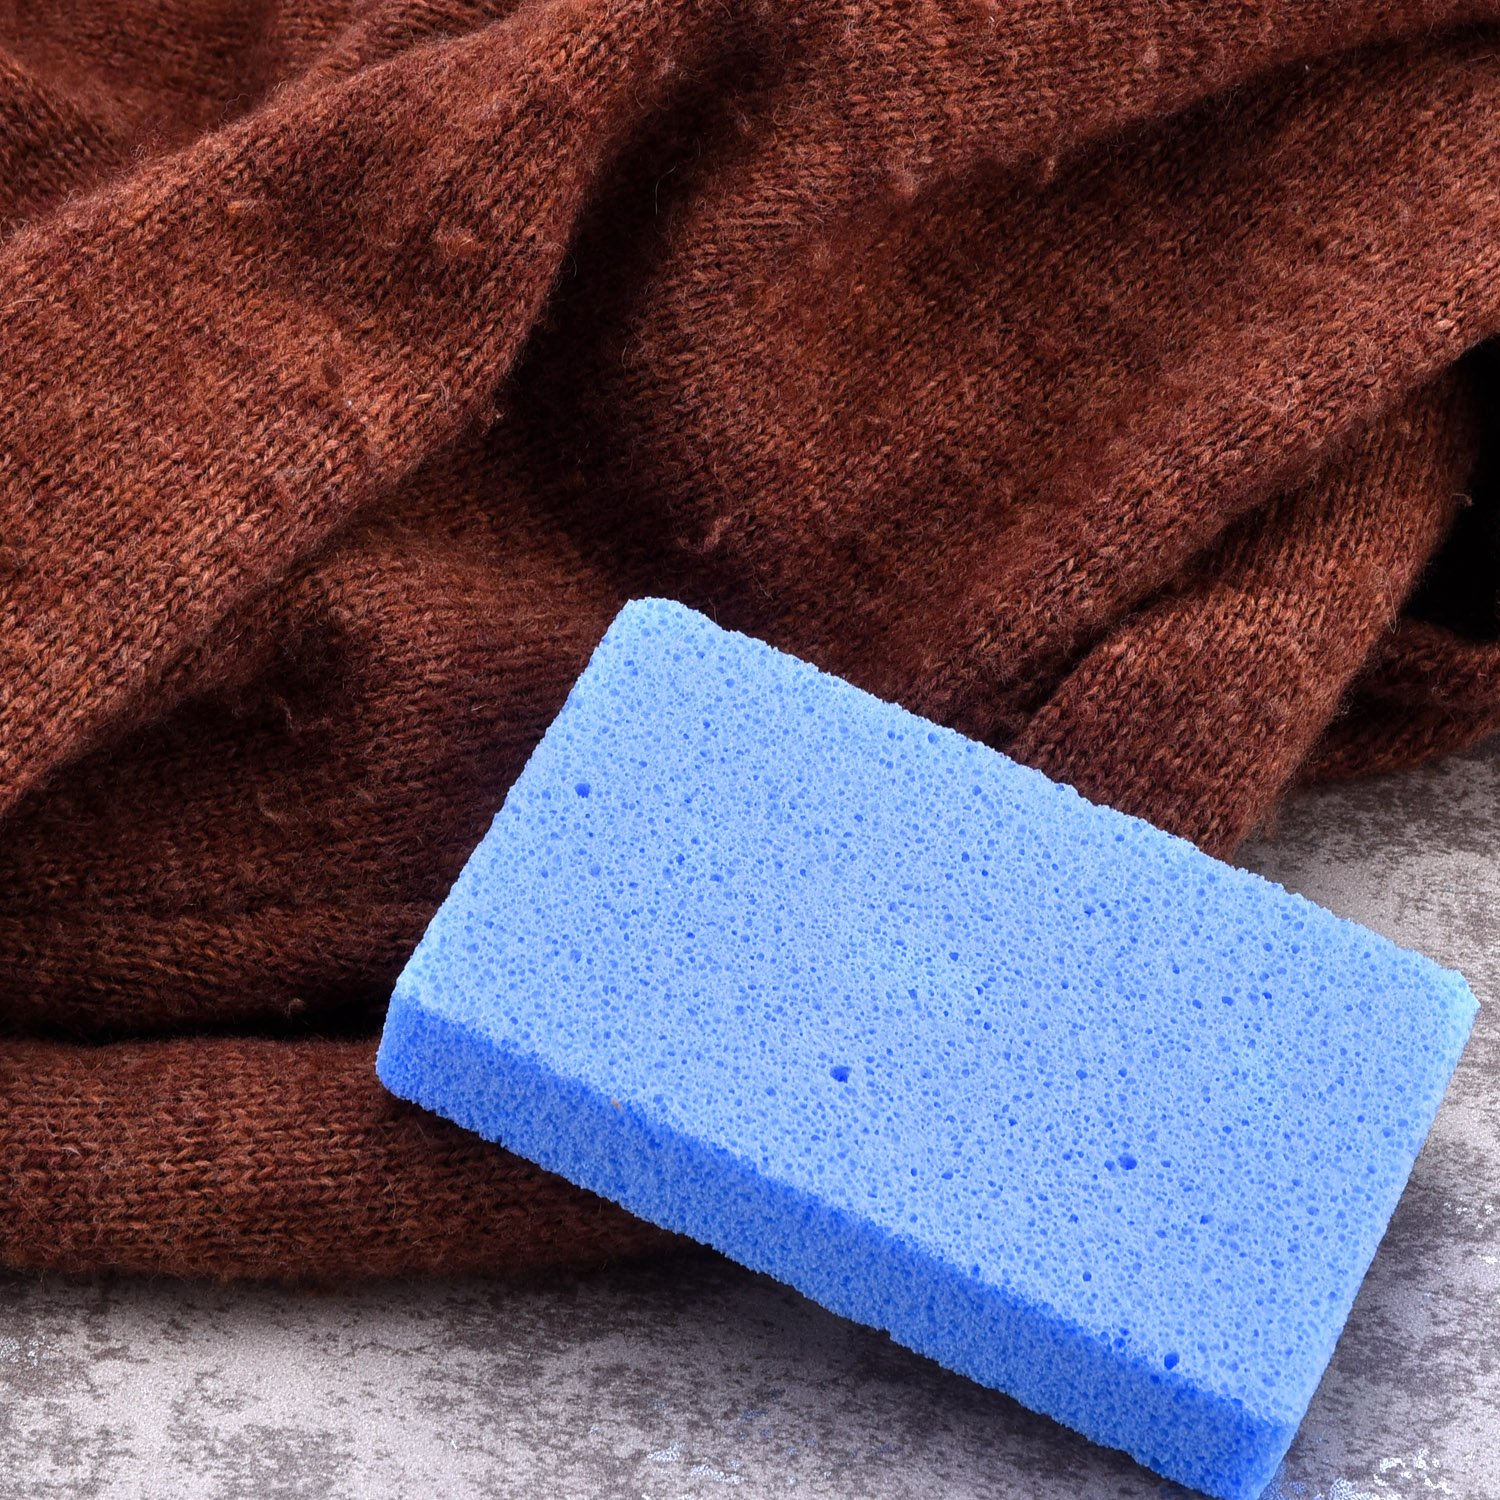 sweater stone cleaning cloths tools - 副本